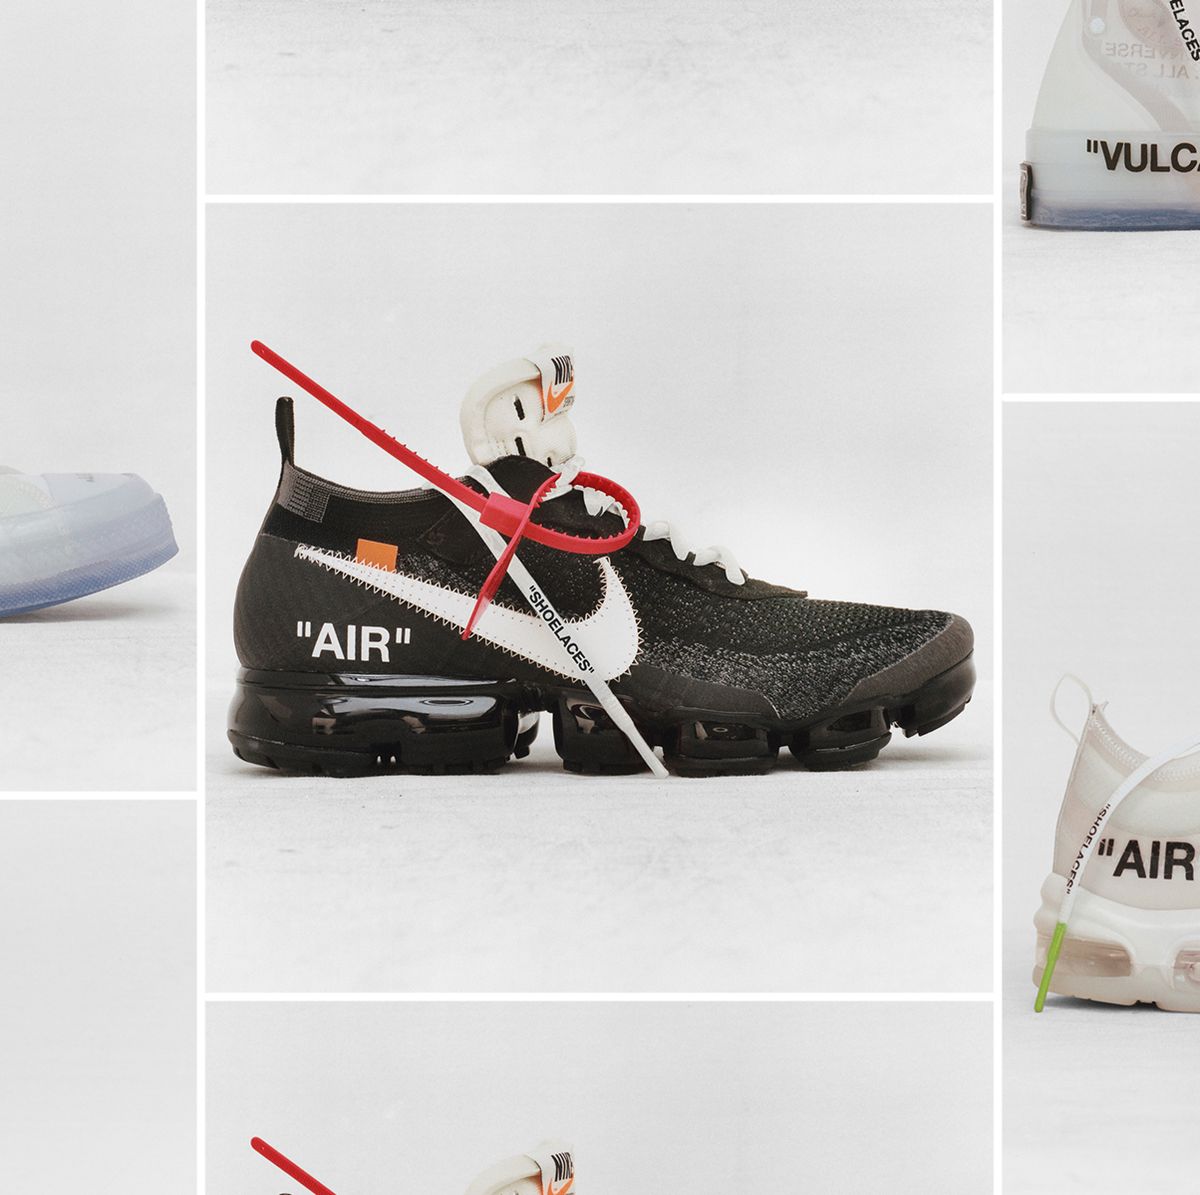 OFF WHITE Nike Air Max 90 Release Date September 1st